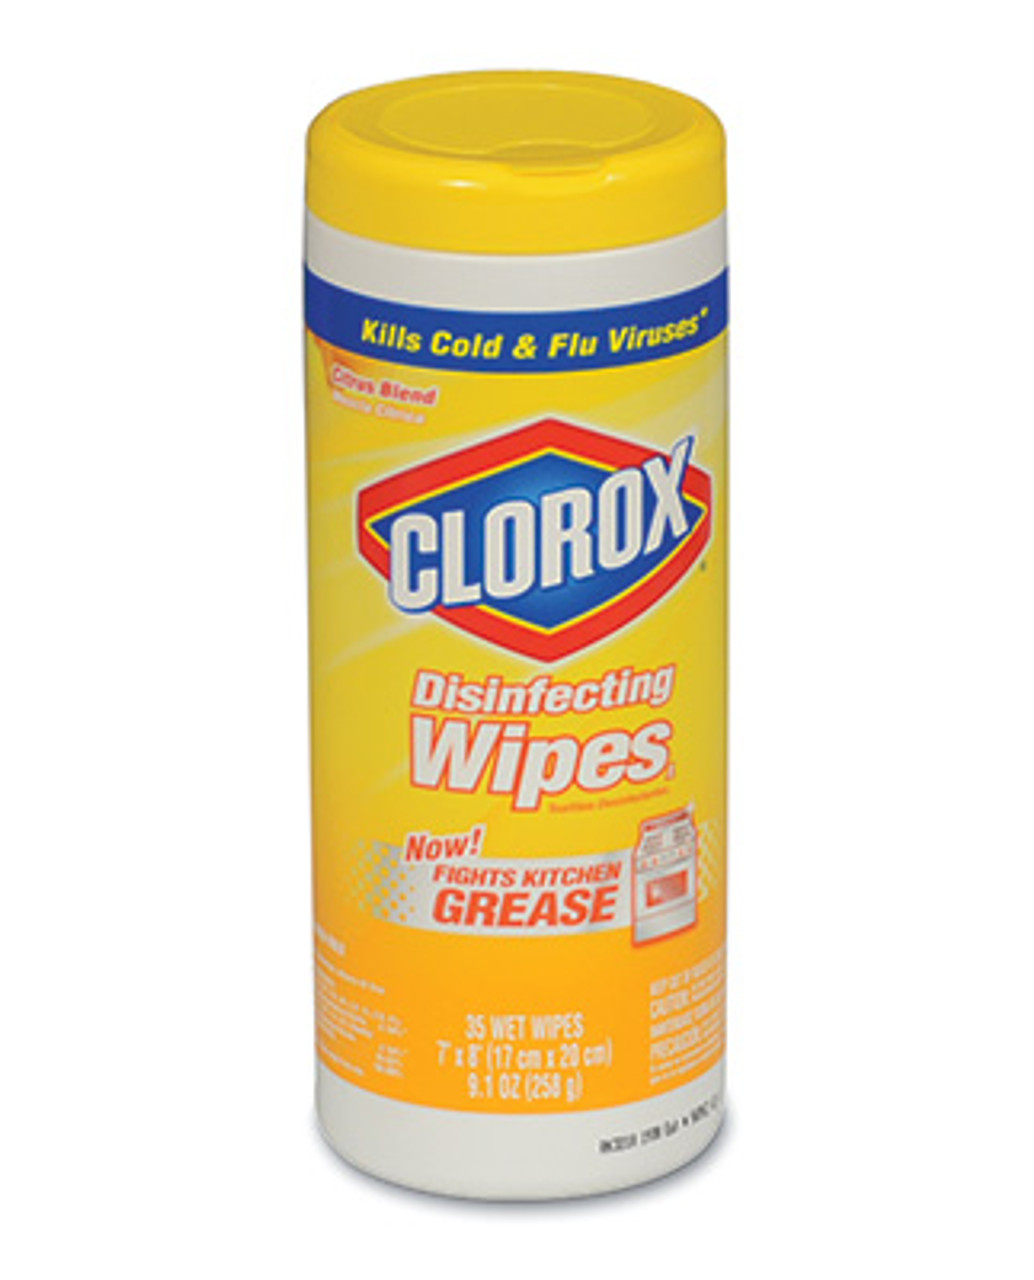 CLOROX Disinfecting Wipes with Citrus Scent in Pop-up Canister (35-Count) (Qty) 1 Roll